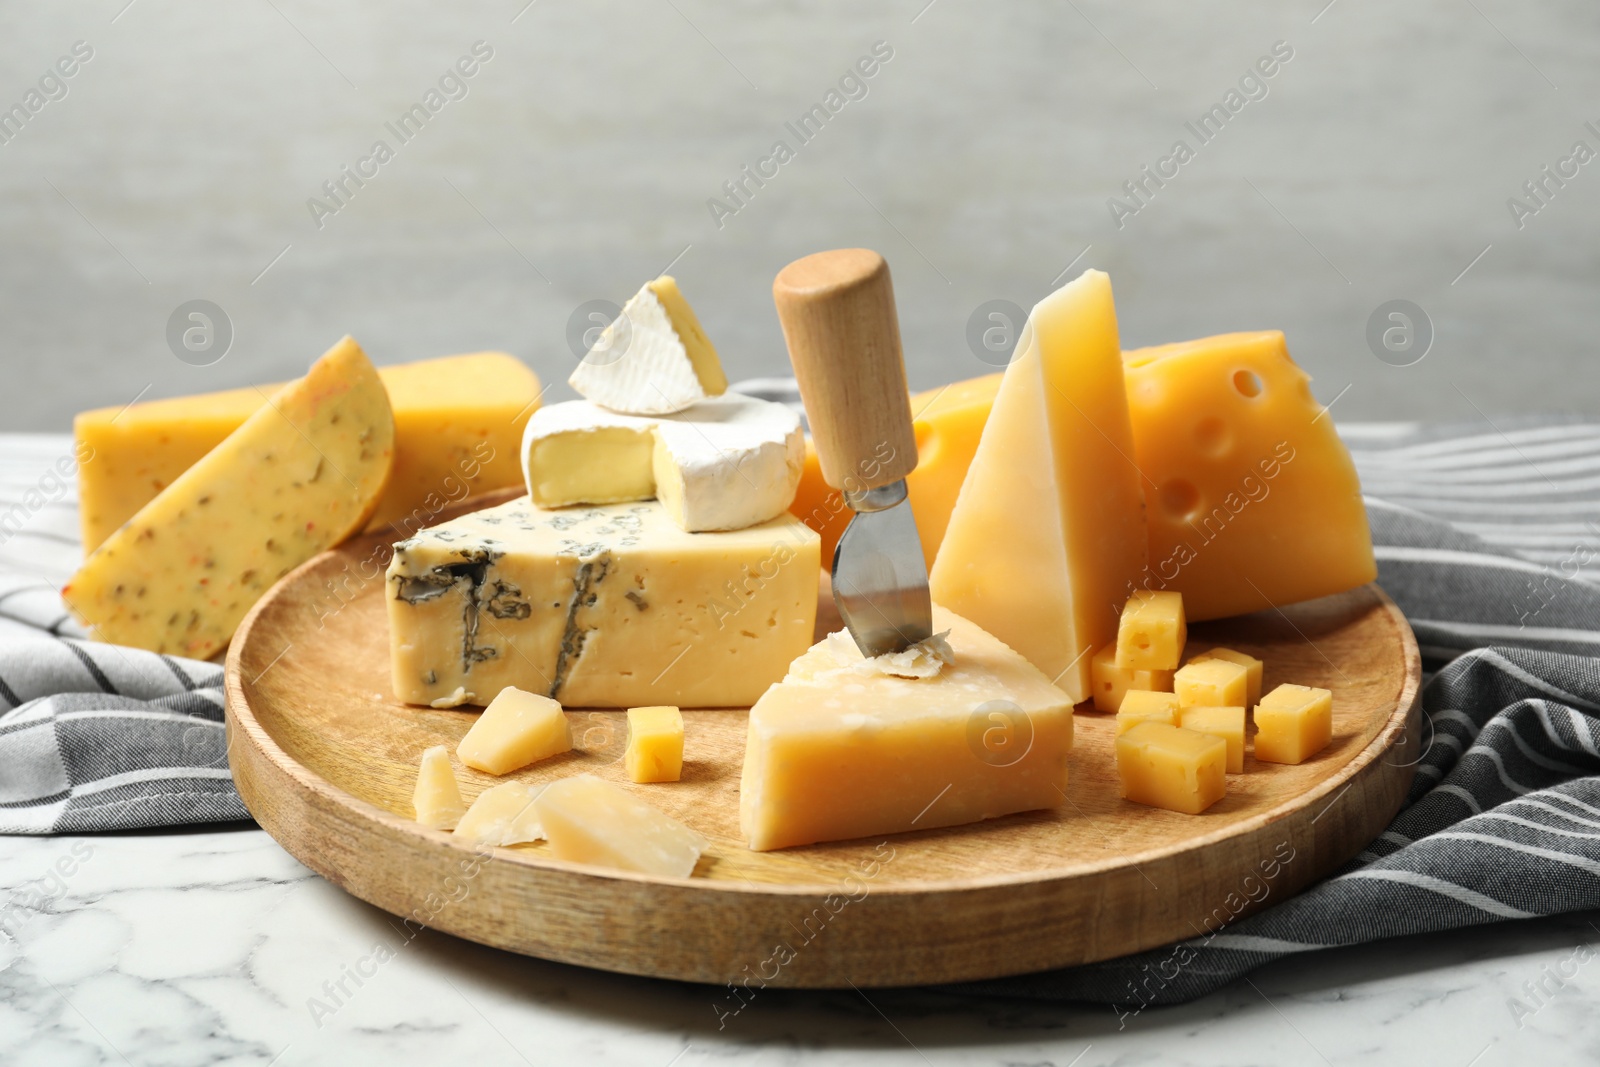 Photo of Wooden plate with different types of delicious cheese on marble table against light background